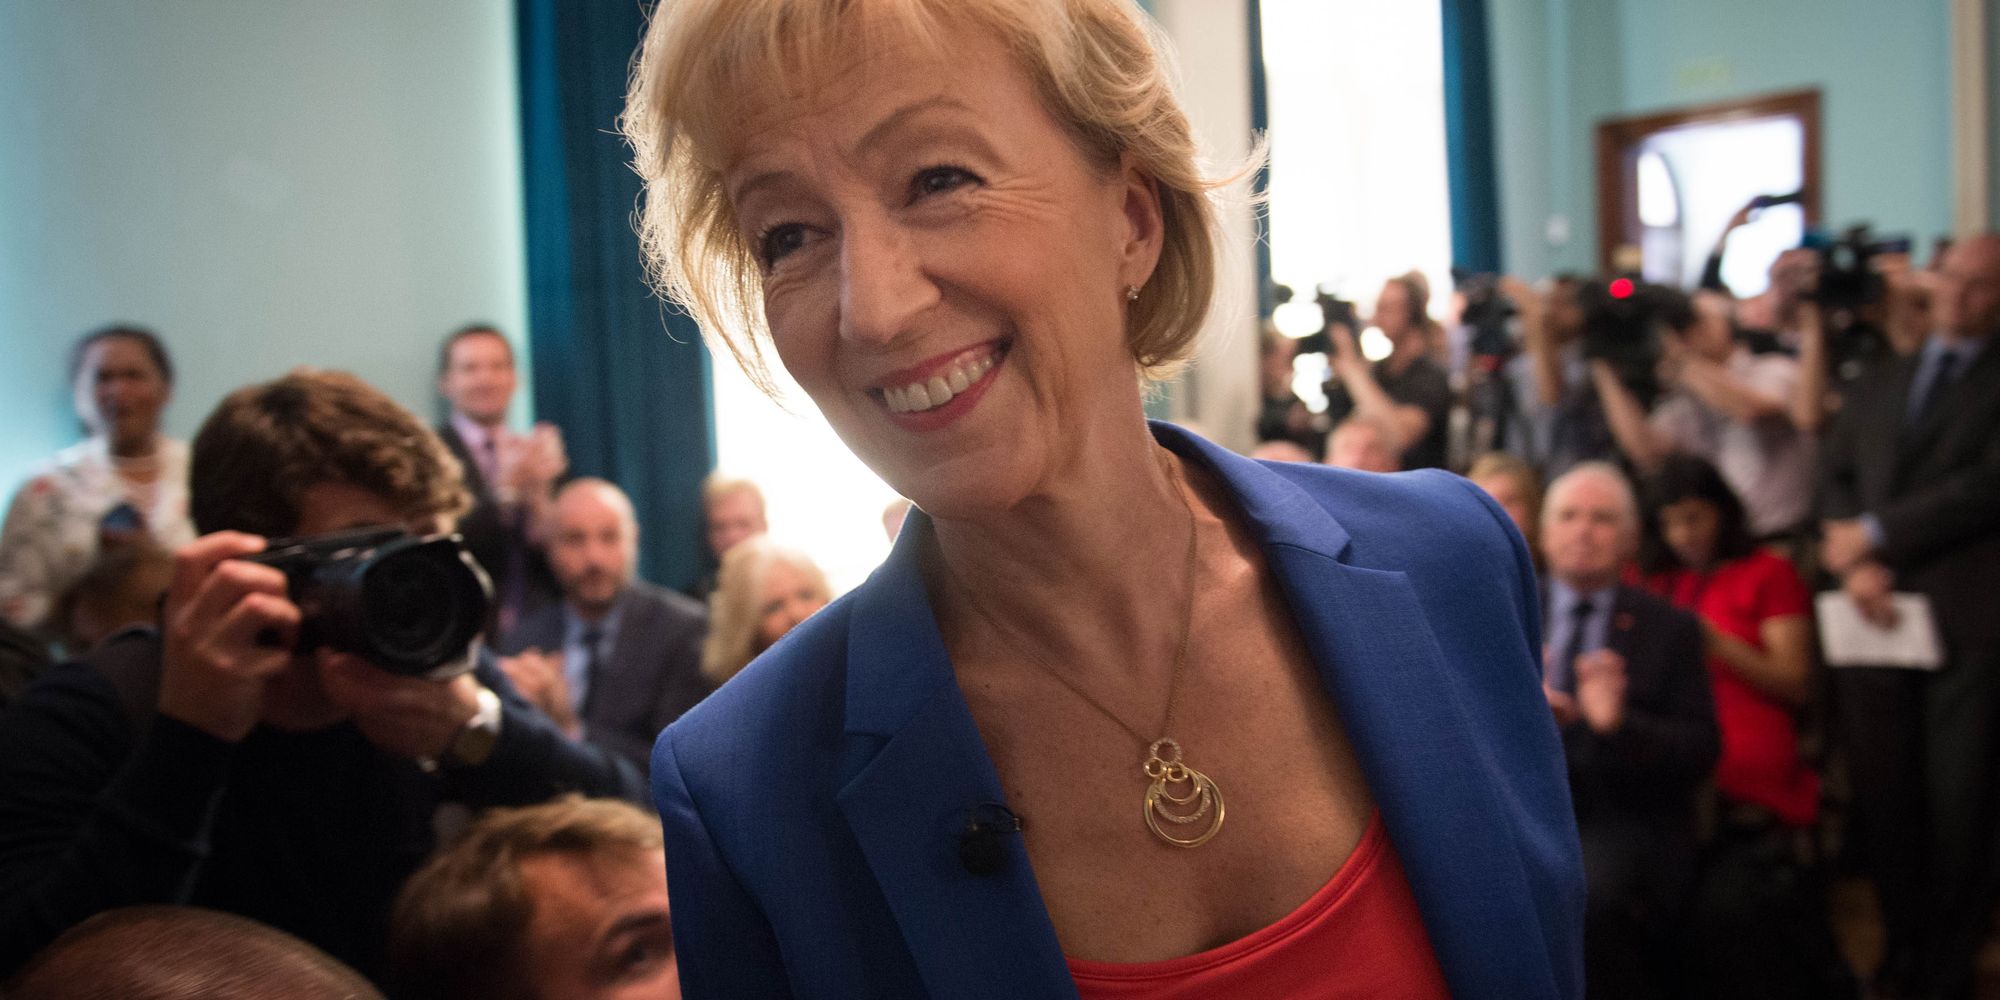 Andrea Leadsom Conservative Leadership Bid Under Fire For Uk Overrun With Foreigners Tweet 